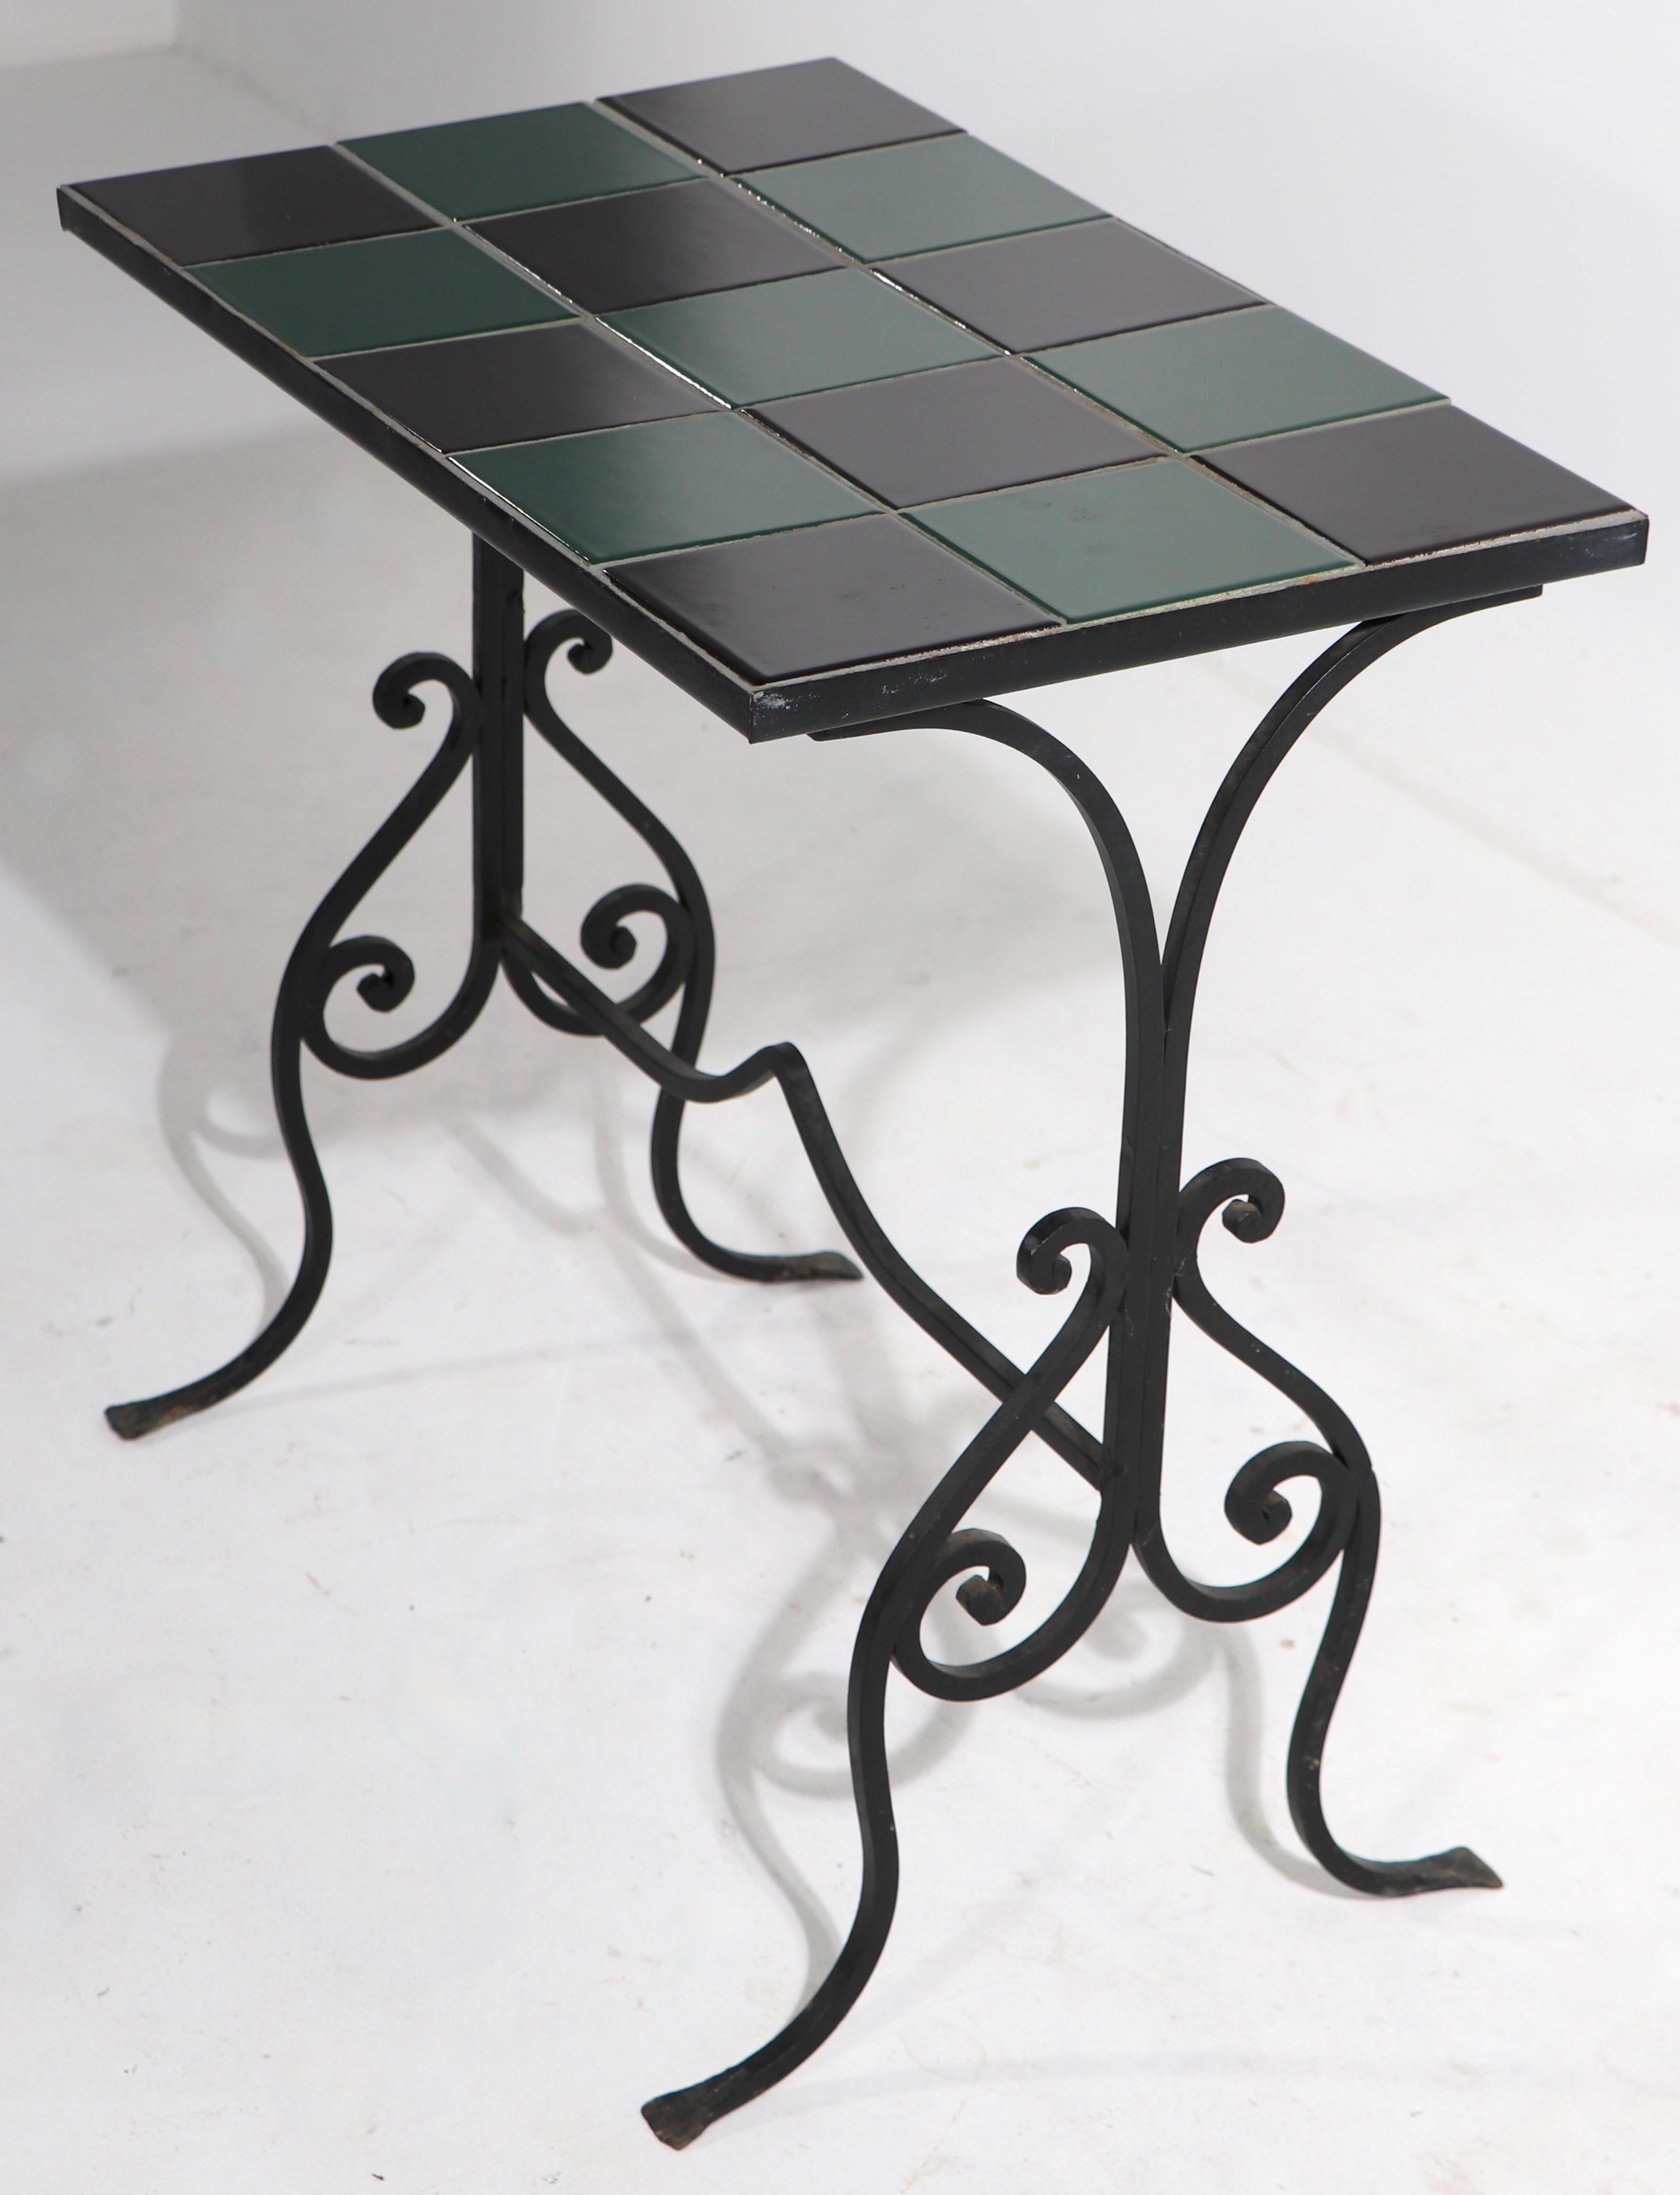 Nice graphic checkerboard top tile top table on decorative wrought iron base. This example is in very fine, original condition, clean and ready to use.